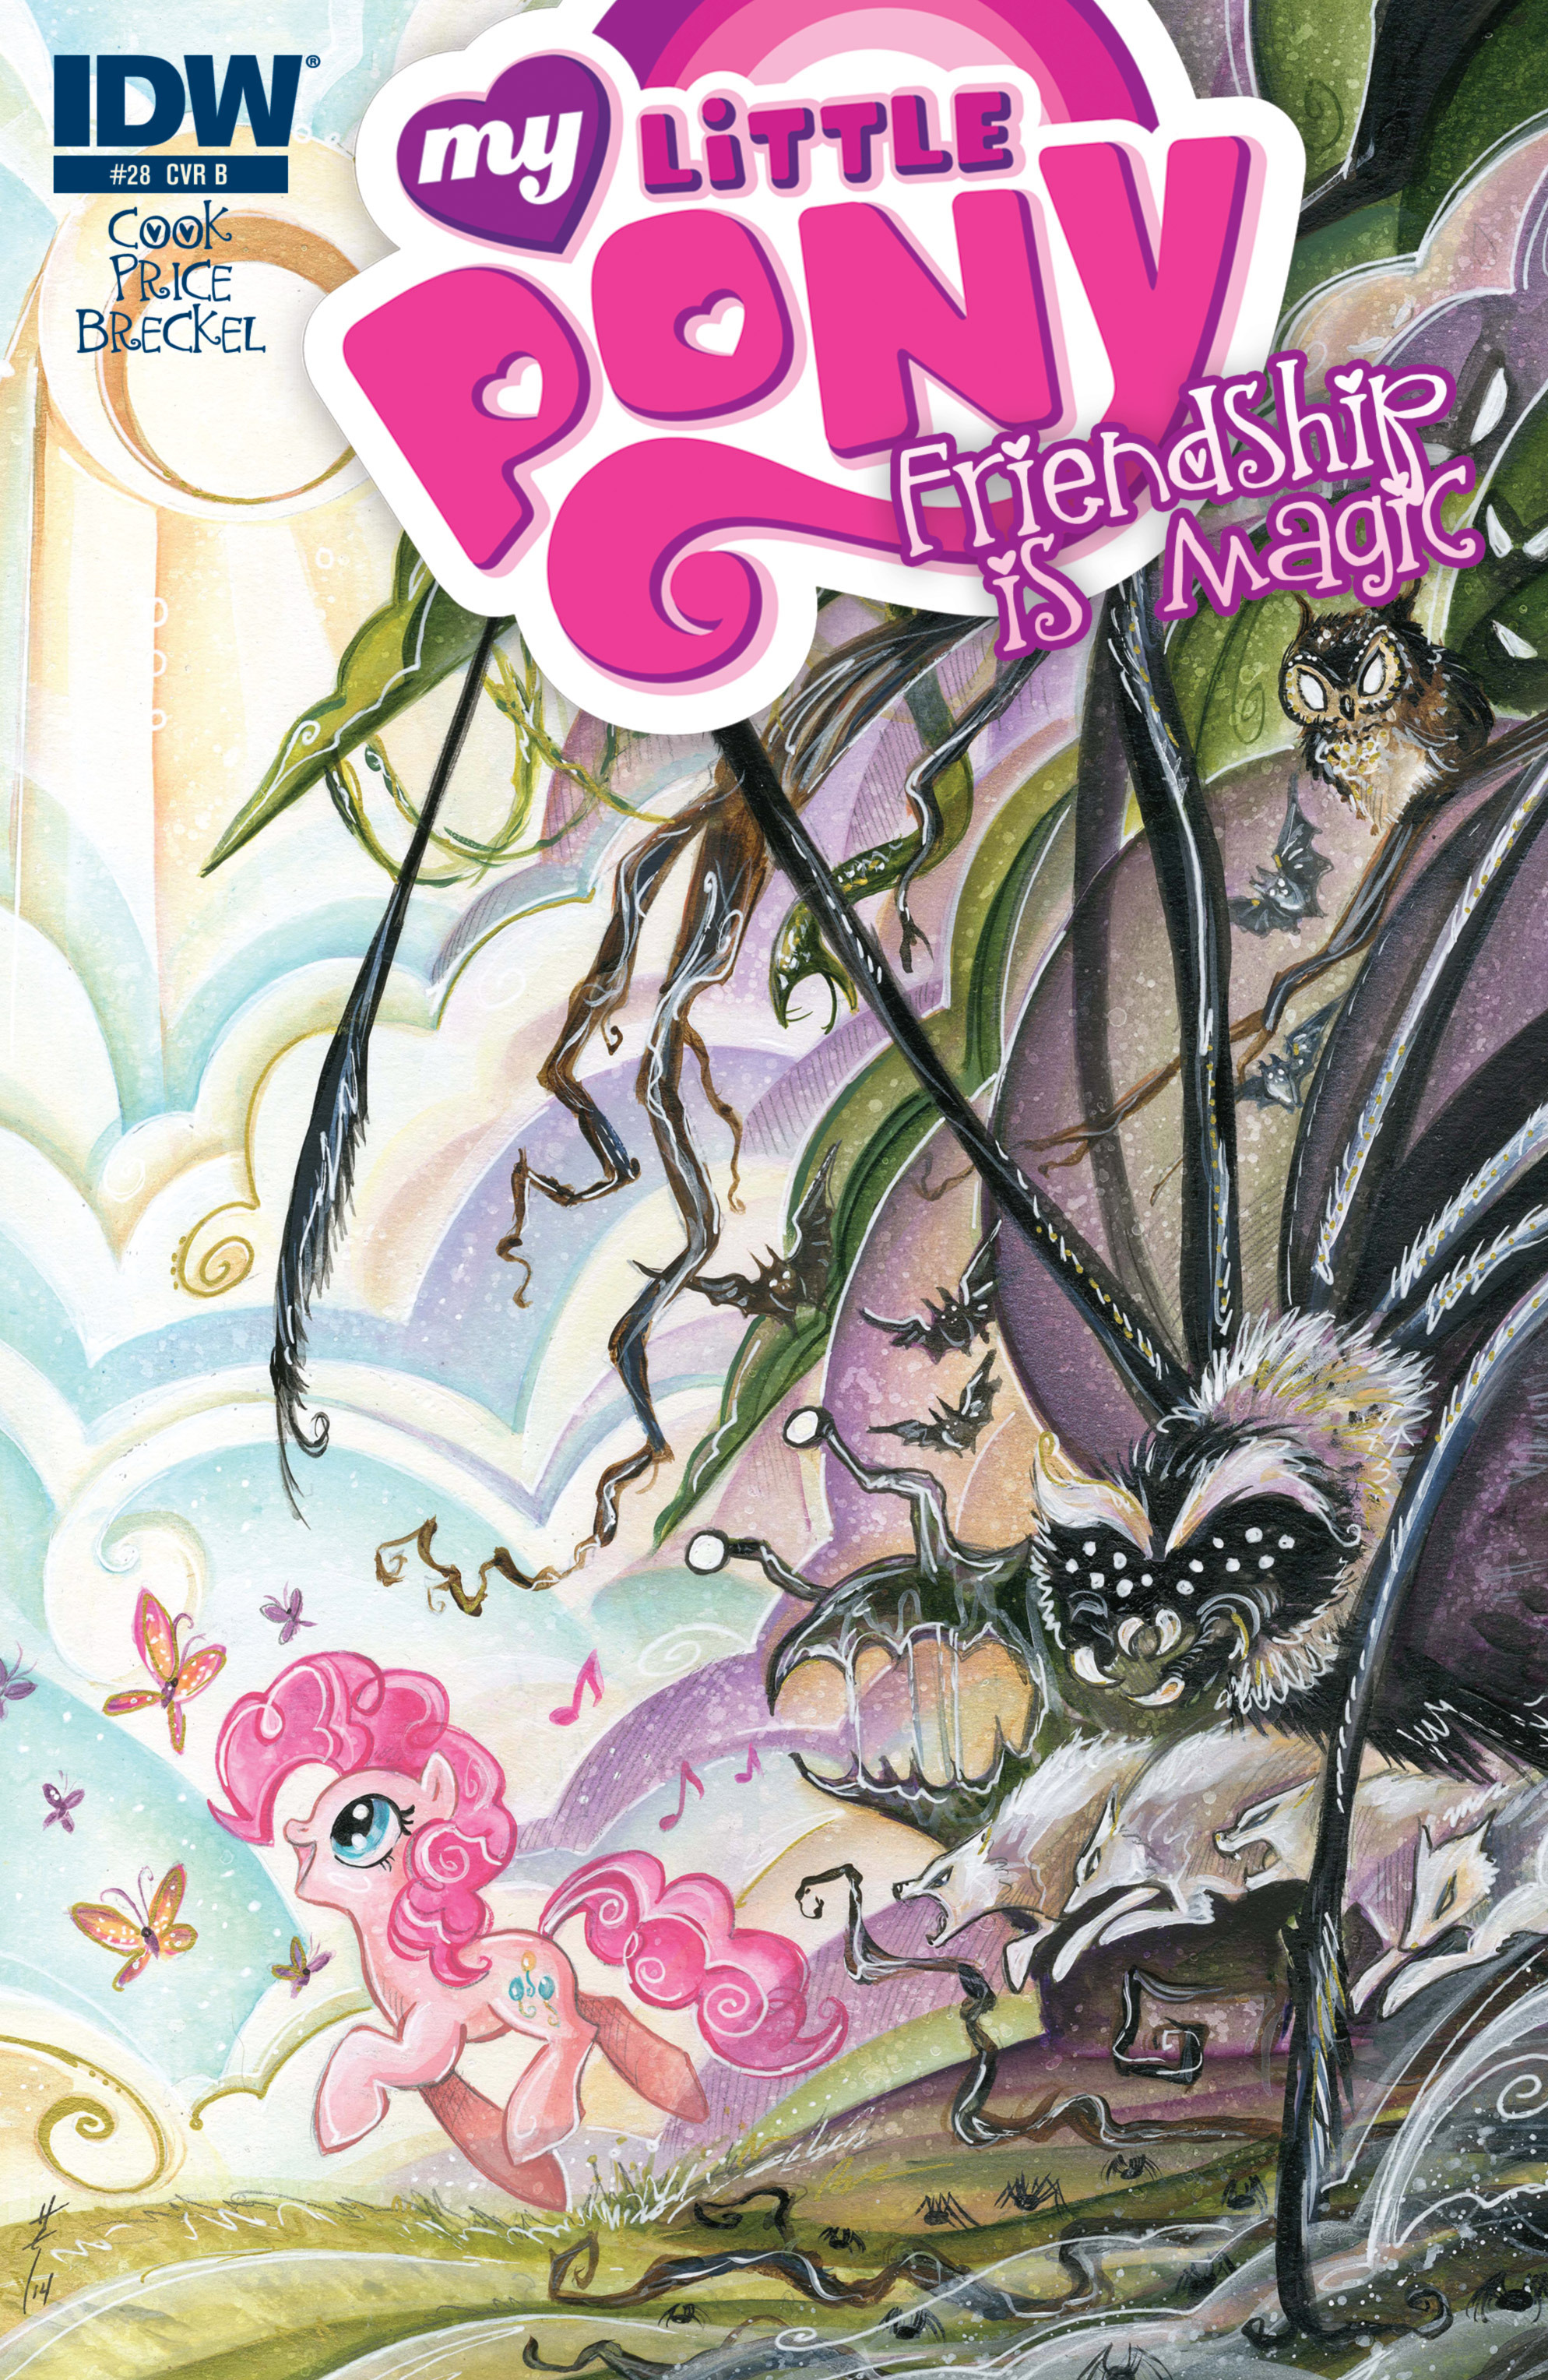 Read online My Little Pony: Friendship is Magic comic -  Issue #28 - 2